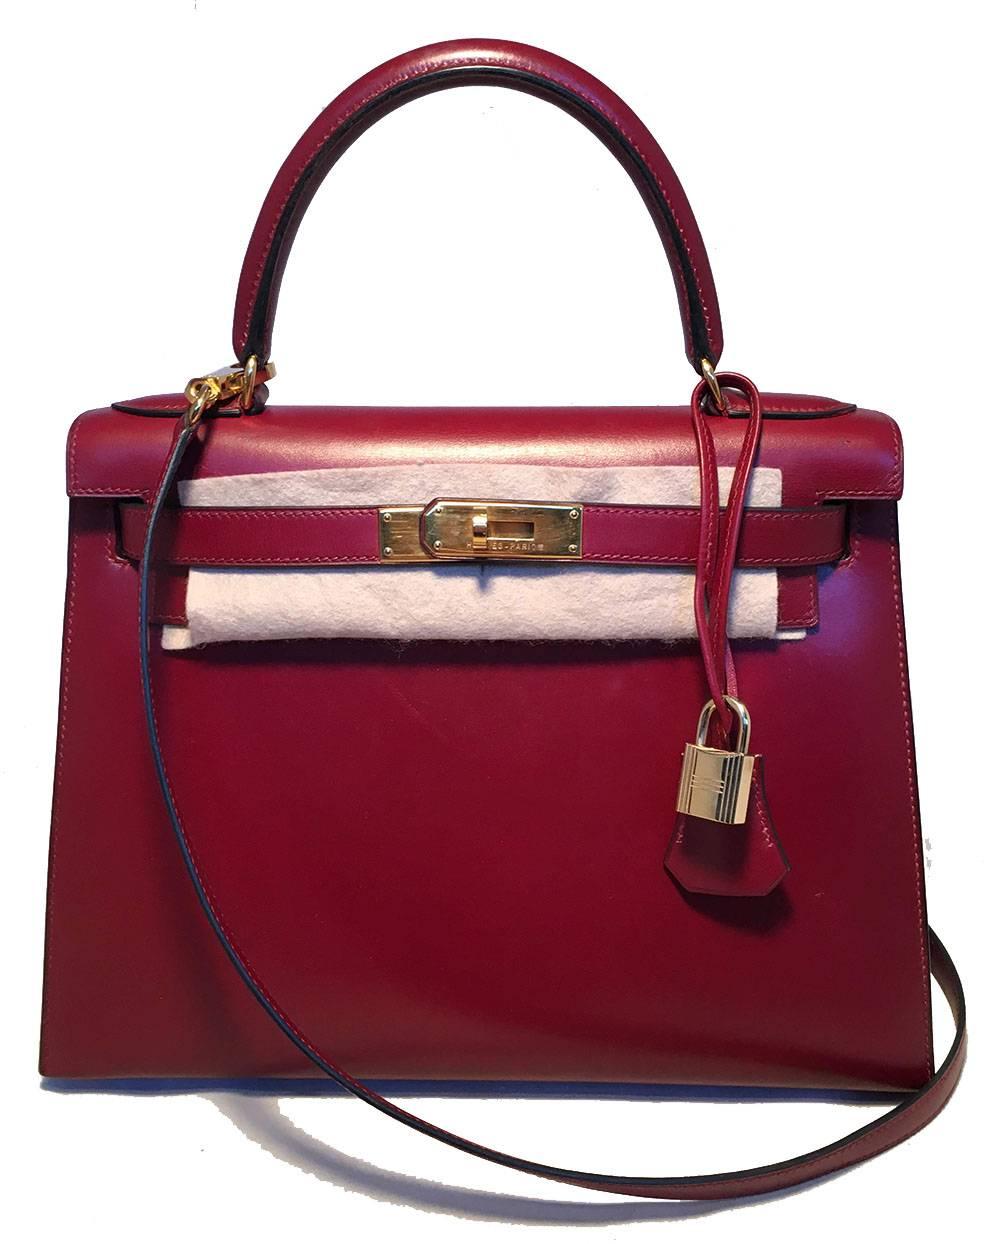 STUNNING Hermes Vintage Rouge Box Calf 28cm Kelly Bag with Strap in excellent condition.  Rouge red box calf leather trimmed with gold hardware. Removable matching shoulder strap included. Top signature kelly style double strap twist closure opens